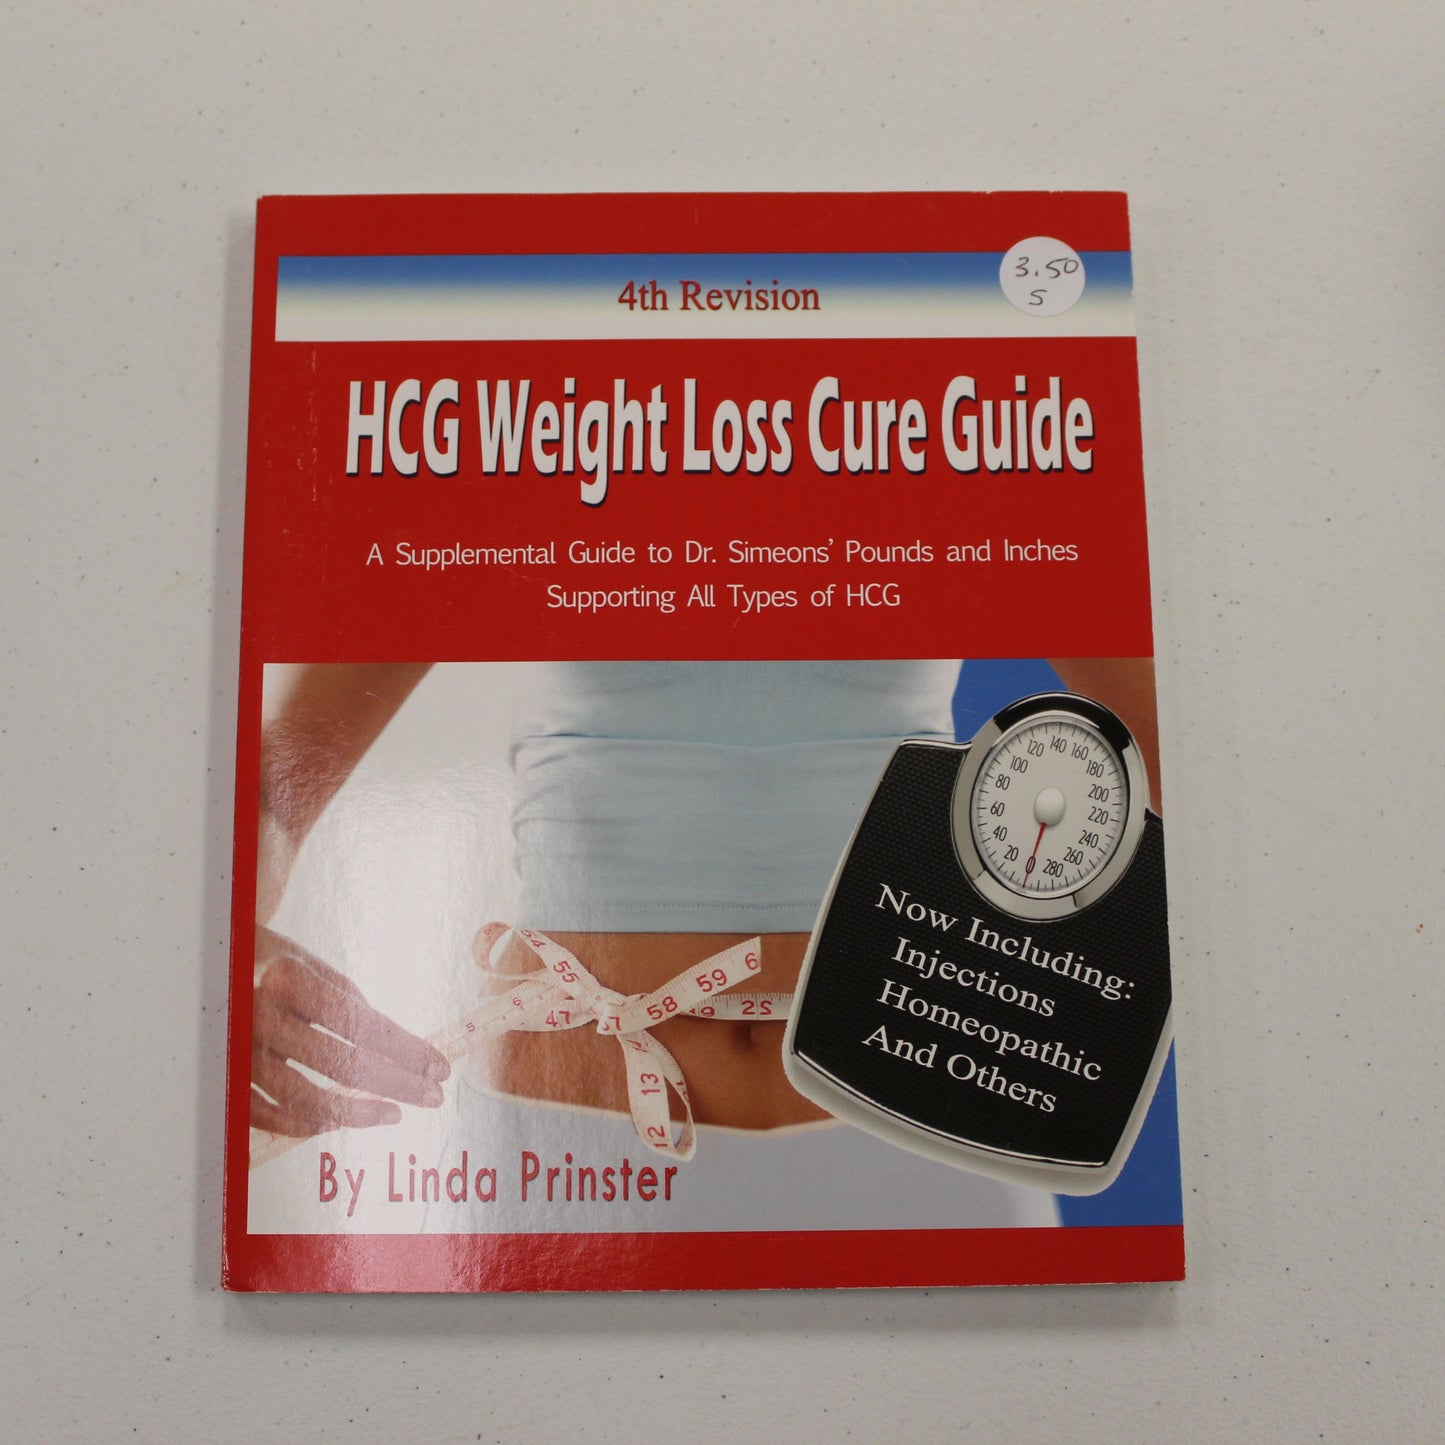 HCG WEIGHT LOSS CURE GUIDE